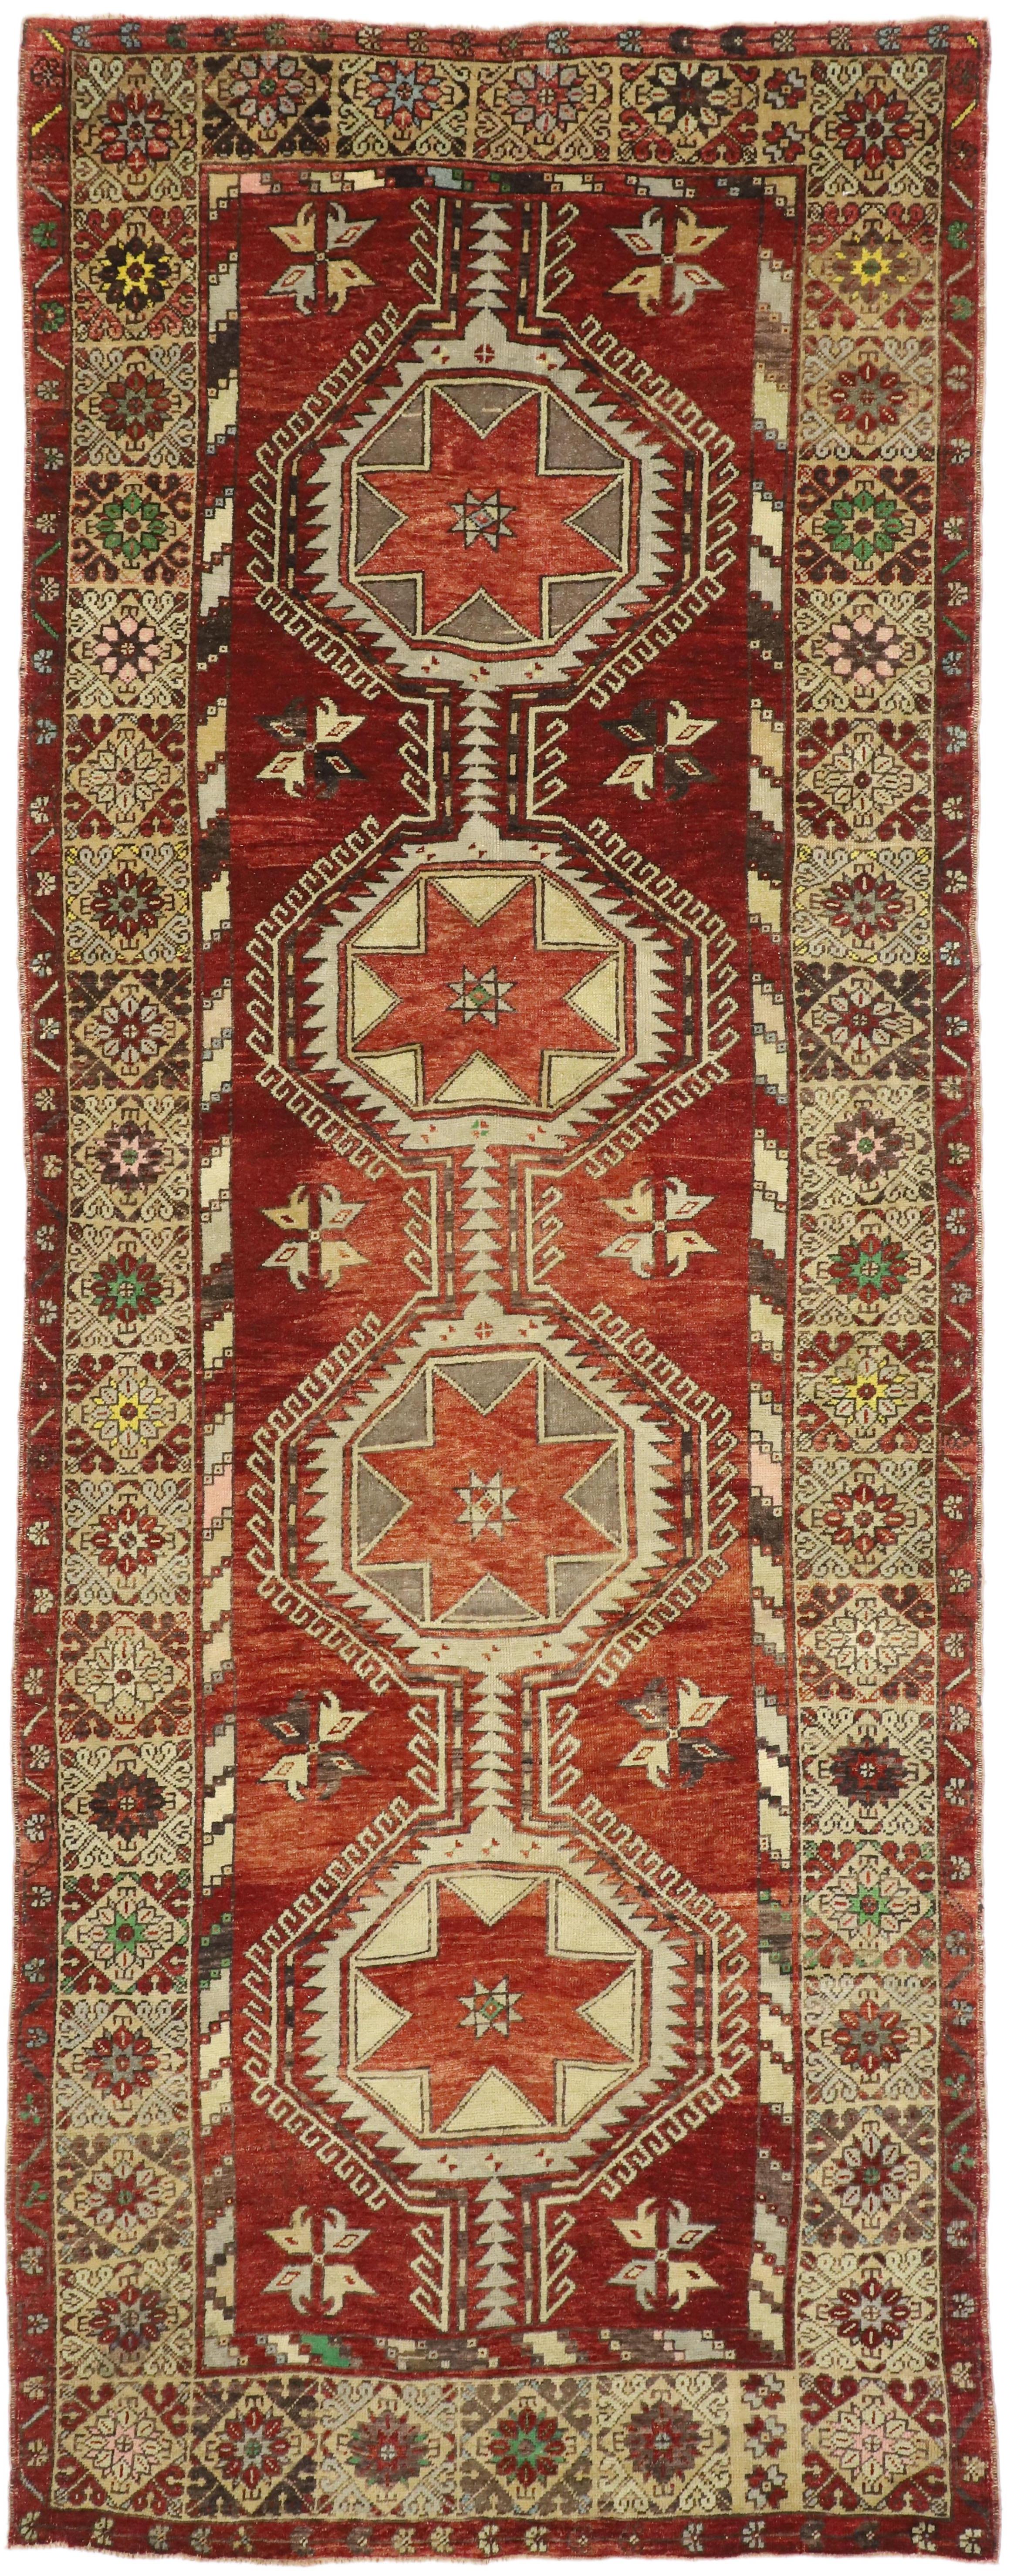 52249 Vintage Turkish Oushak Gallery Rug with Mid-Century Modern Style, Hallway Runner. This hand-knotted wool vintage Turkish Oushak runner features a pole medallion composed of serrated octagonal motifs patterned with eight-point stars connected